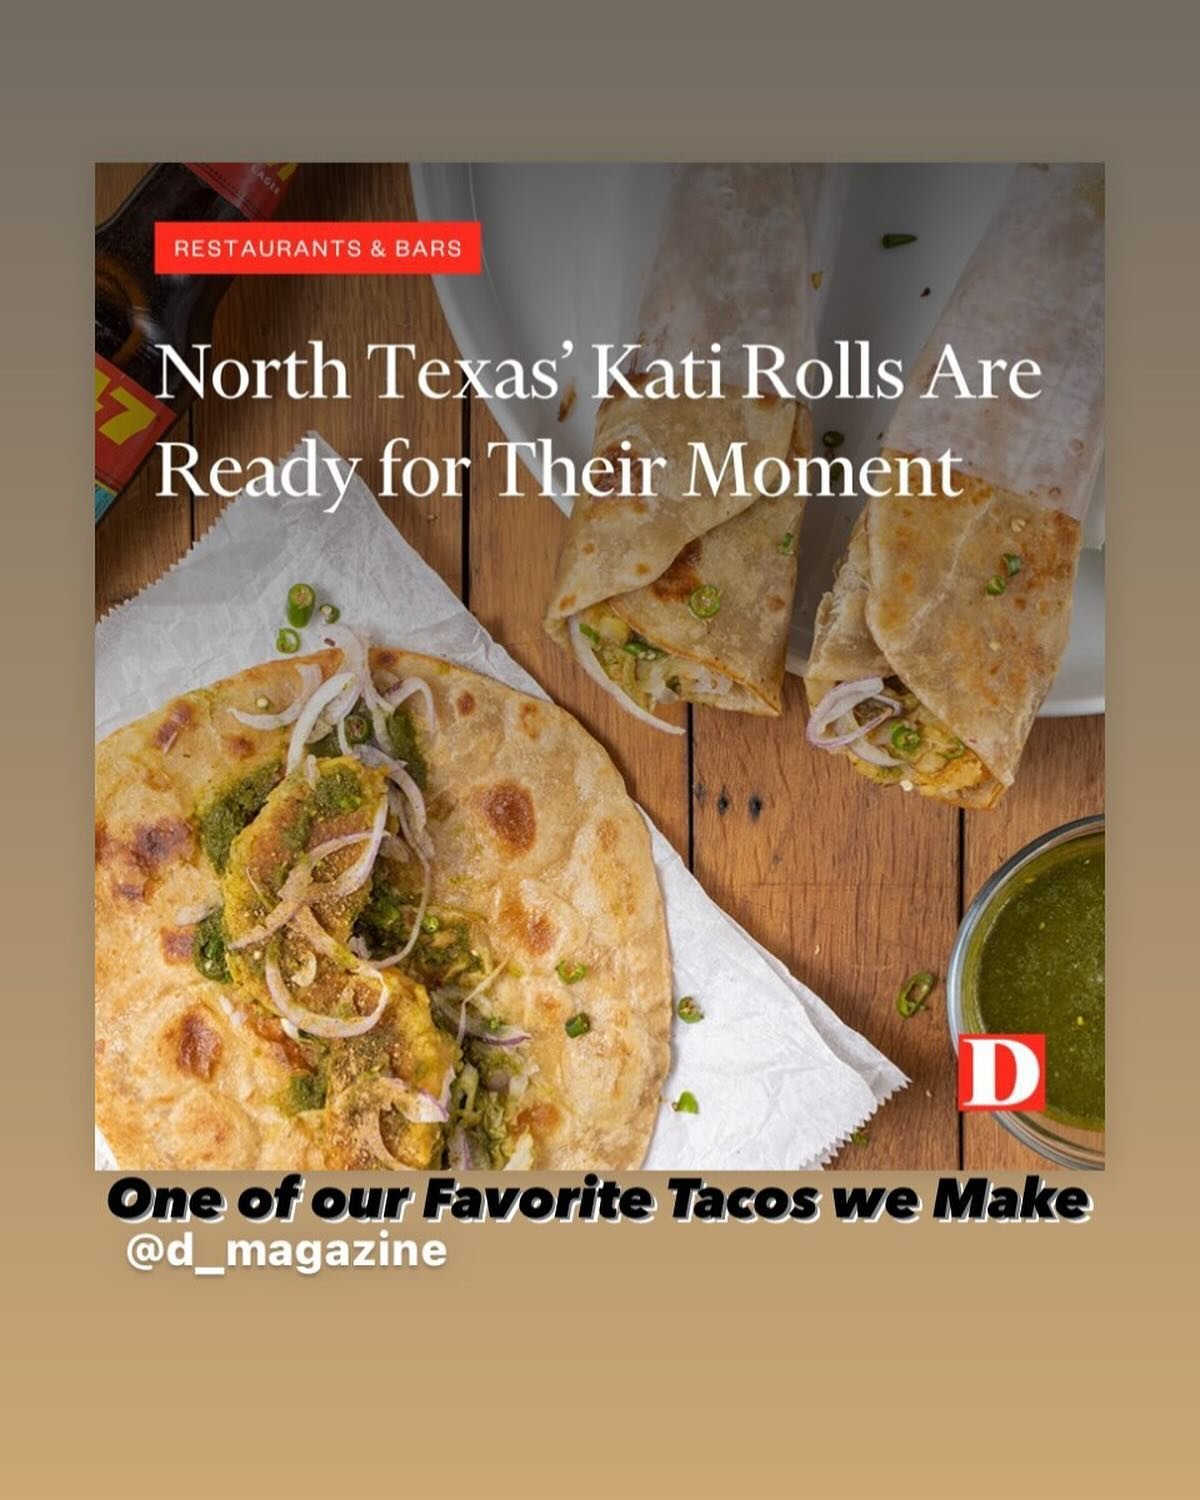 @d_magazine thanks for the shout out for our Kati Roll Taco! It has become one of our guests favorite vegetarian tacos on our menu!  Items like this allow us the recreate global dishes and turn them into non-authentic tacos but allows for an exciting